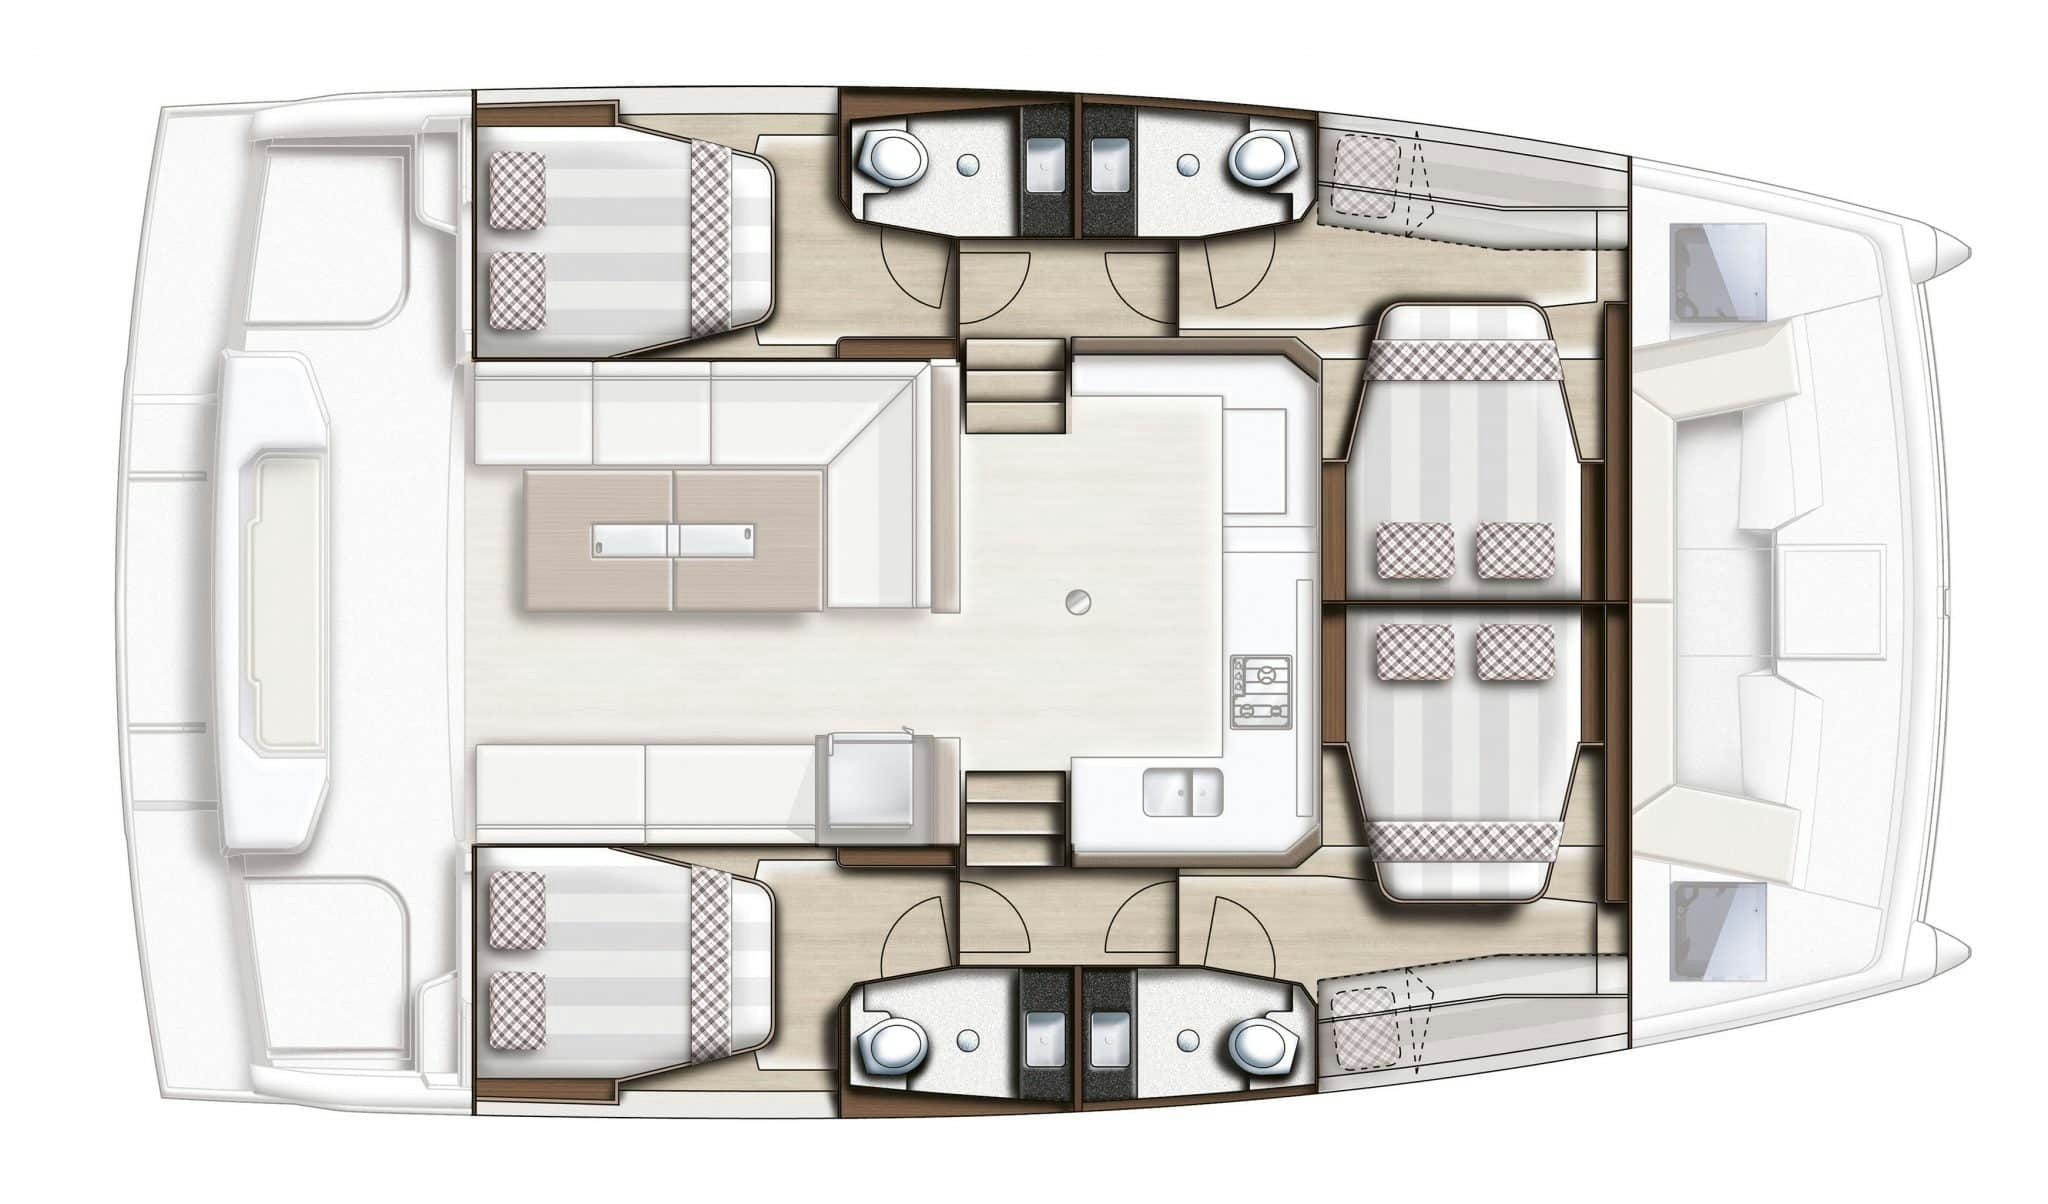 Floor plan image for yacht Bali Catspace - Let s go